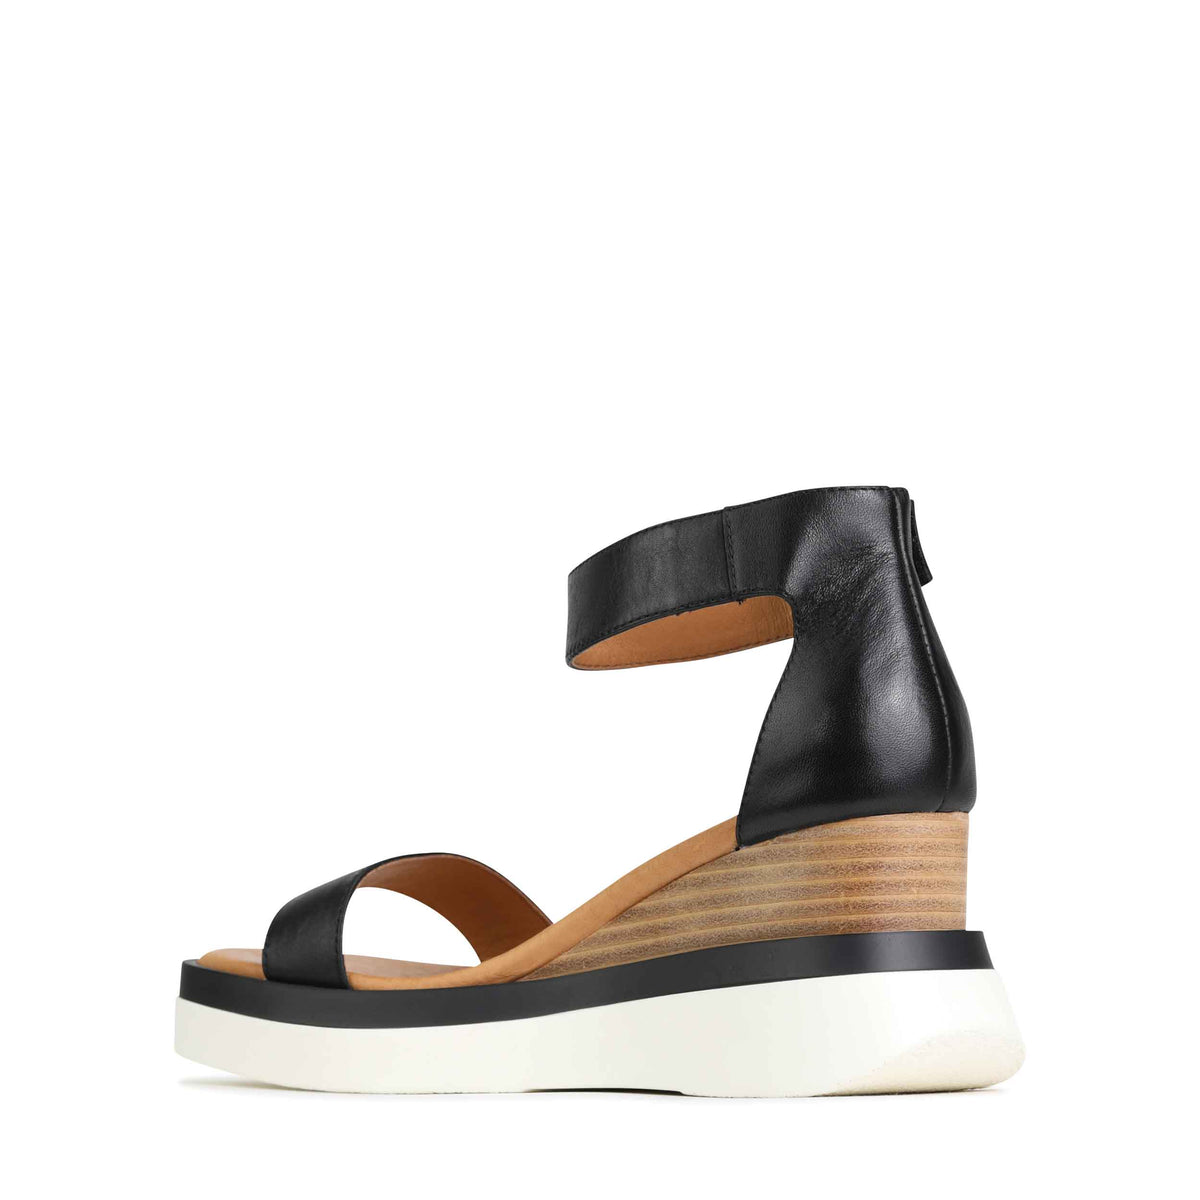 Parallel Culture Shoes and Fashion Online WEDGES EOS SASKINA WEDGE